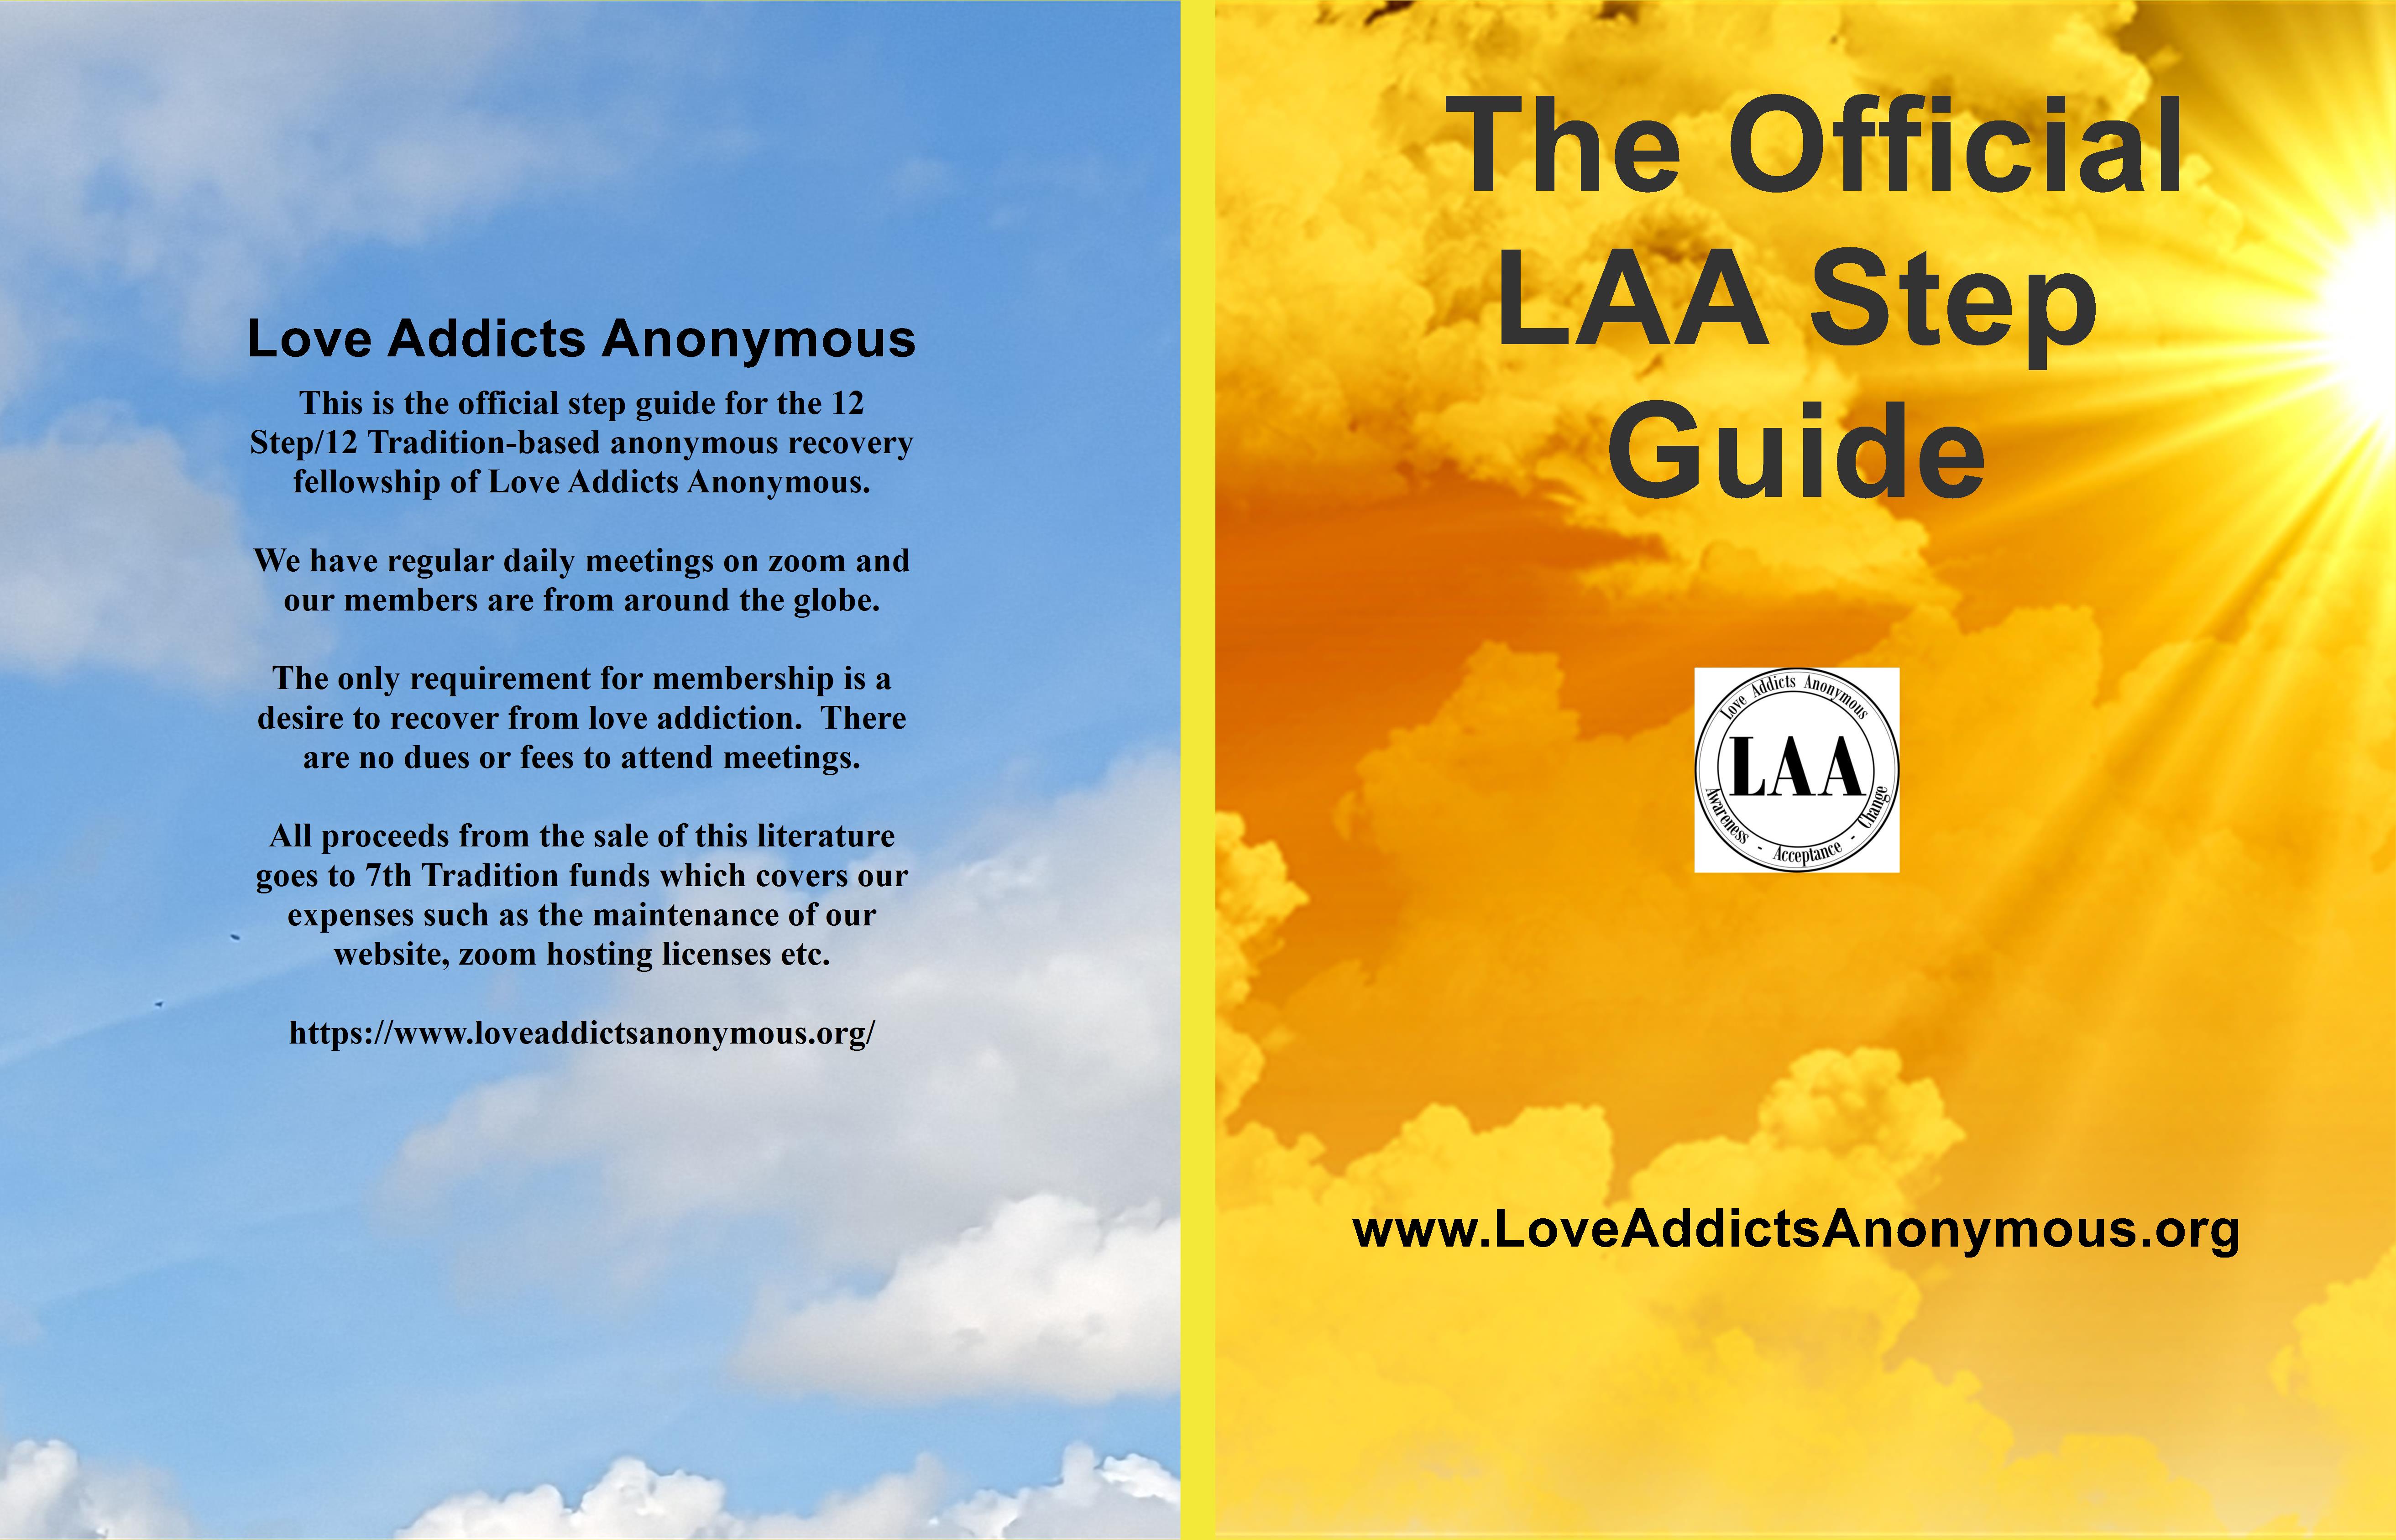 LAA Step Guide cover image